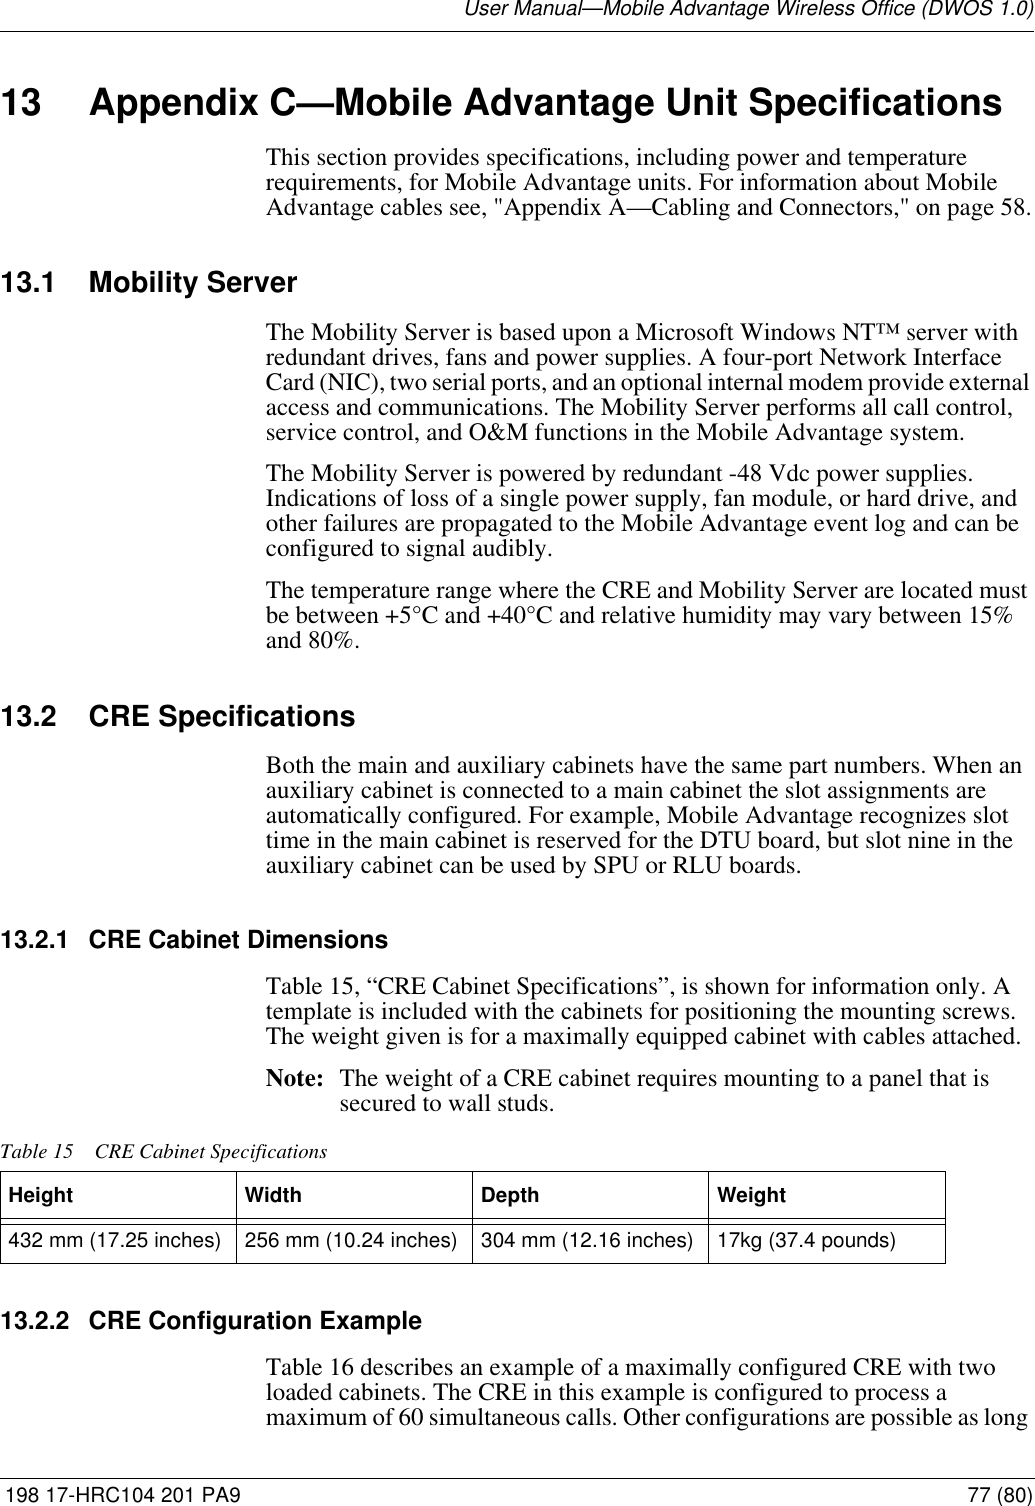 User Manual—Mobile Advantage Wireless Office (DWOS 1.0) 198 17-HRC104 201 PA9 77 (80)13 Appendix C—Mobile Advantage Unit SpecificationsThis section provides specifications, including power and temperature requirements, for Mobile Advantage units. For information about Mobile Advantage cables see, &quot;Appendix A—Cabling and Connectors,&quot; on page 58.13.1 Mobility ServerThe Mobility Server is based upon a Microsoft Windows NT™ server with redundant drives, fans and power supplies. A four-port Network Interface Card (NIC), two serial ports, and an optional internal modem provide external access and communications. The Mobility Server performs all call control, service control, and O&amp;M functions in the Mobile Advantage system. The Mobility Server is powered by redundant -48 Vdc power supplies. Indications of loss of a single power supply, fan module, or hard drive, and other failures are propagated to the Mobile Advantage event log and can be configured to signal audibly.The temperature range where the CRE and Mobility Server are located must be between +5°C and +40°C and relative humidity may vary between 15% and 80%.13.2 CRE SpecificationsBoth the main and auxiliary cabinets have the same part numbers. When an auxiliary cabinet is connected to a main cabinet the slot assignments are automatically configured. For example, Mobile Advantage recognizes slot time in the main cabinet is reserved for the DTU board, but slot nine in the auxiliary cabinet can be used by SPU or RLU boards.13.2.1 CRE Cabinet DimensionsTable 15, “CRE Cabinet Specifications”, is shown for information only. A template is included with the cabinets for positioning the mounting screws. The weight given is for a maximally equipped cabinet with cables attached. Note: The weight of a CRE cabinet requires mounting to a panel that is secured to wall studs.13.2.2 CRE Configuration ExampleTable 16 describes an example of a maximally configured CRE with two loaded cabinets. The CRE in this example is configured to process a maximum of 60 simultaneous calls. Other configurations are possible as long Table 15 CRE Cabinet SpecificationsHeight Width  Depth  Weight 432 mm (17.25 inches) 256 mm (10.24 inches) 304 mm (12.16 inches) 17kg (37.4 pounds)